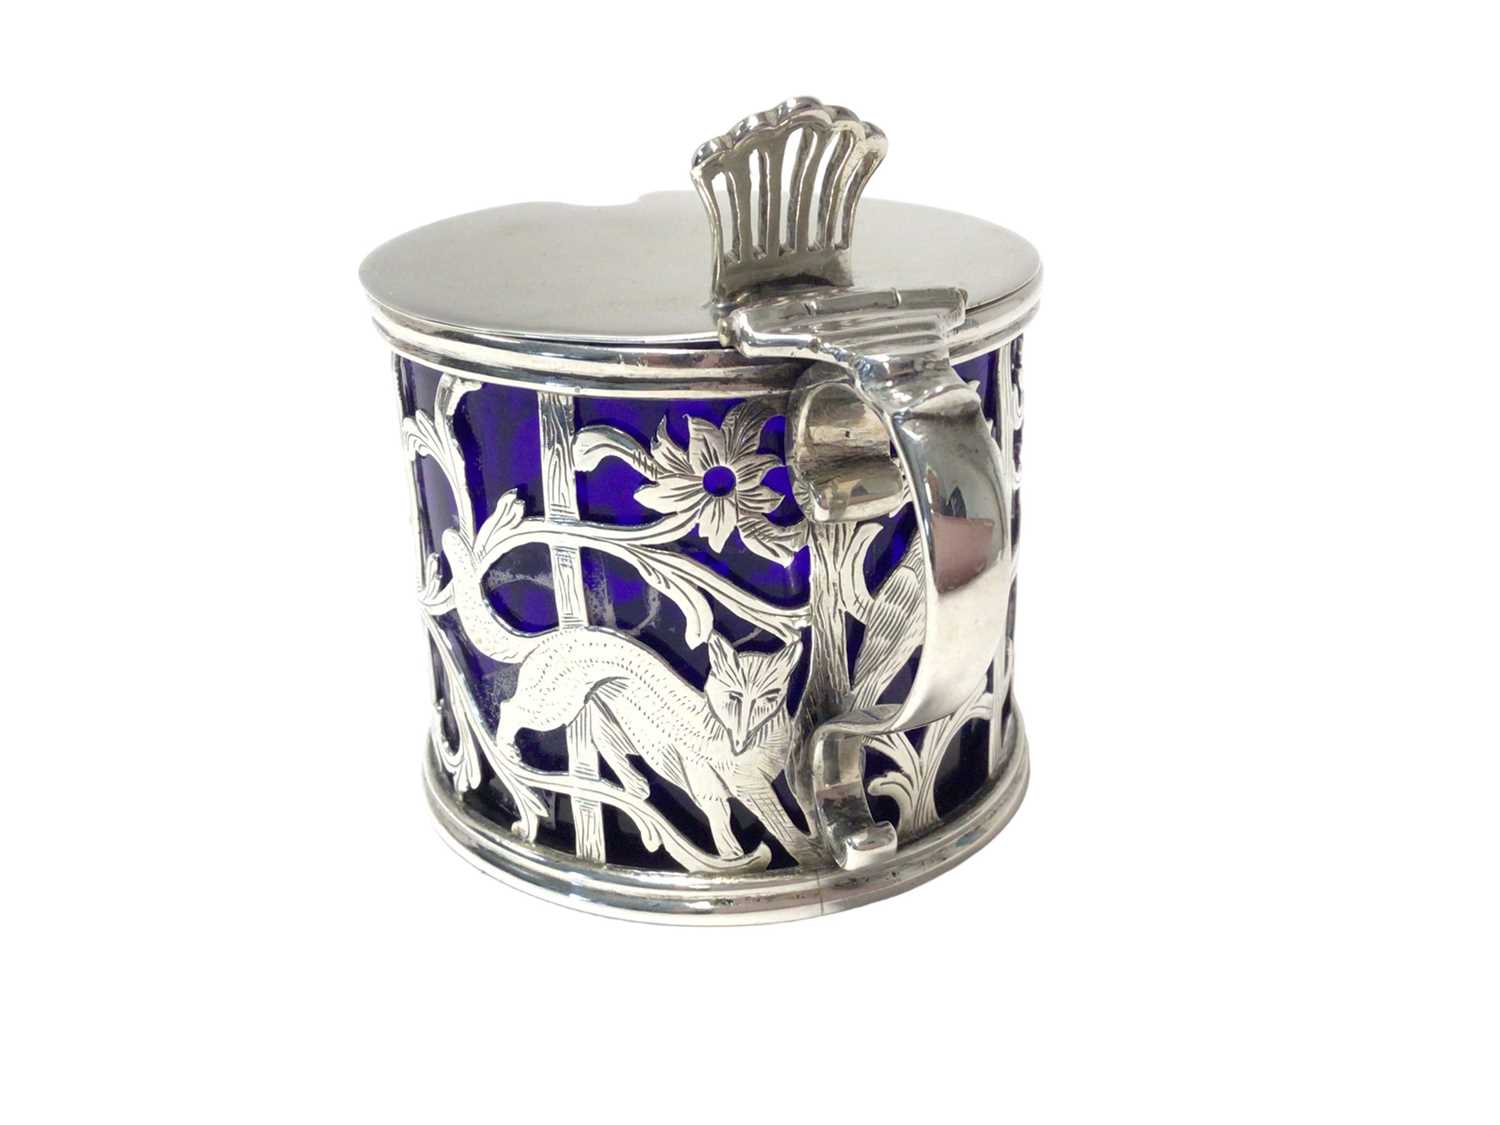 George III silver mustard pot with bird and animal decoration - Image 4 of 6